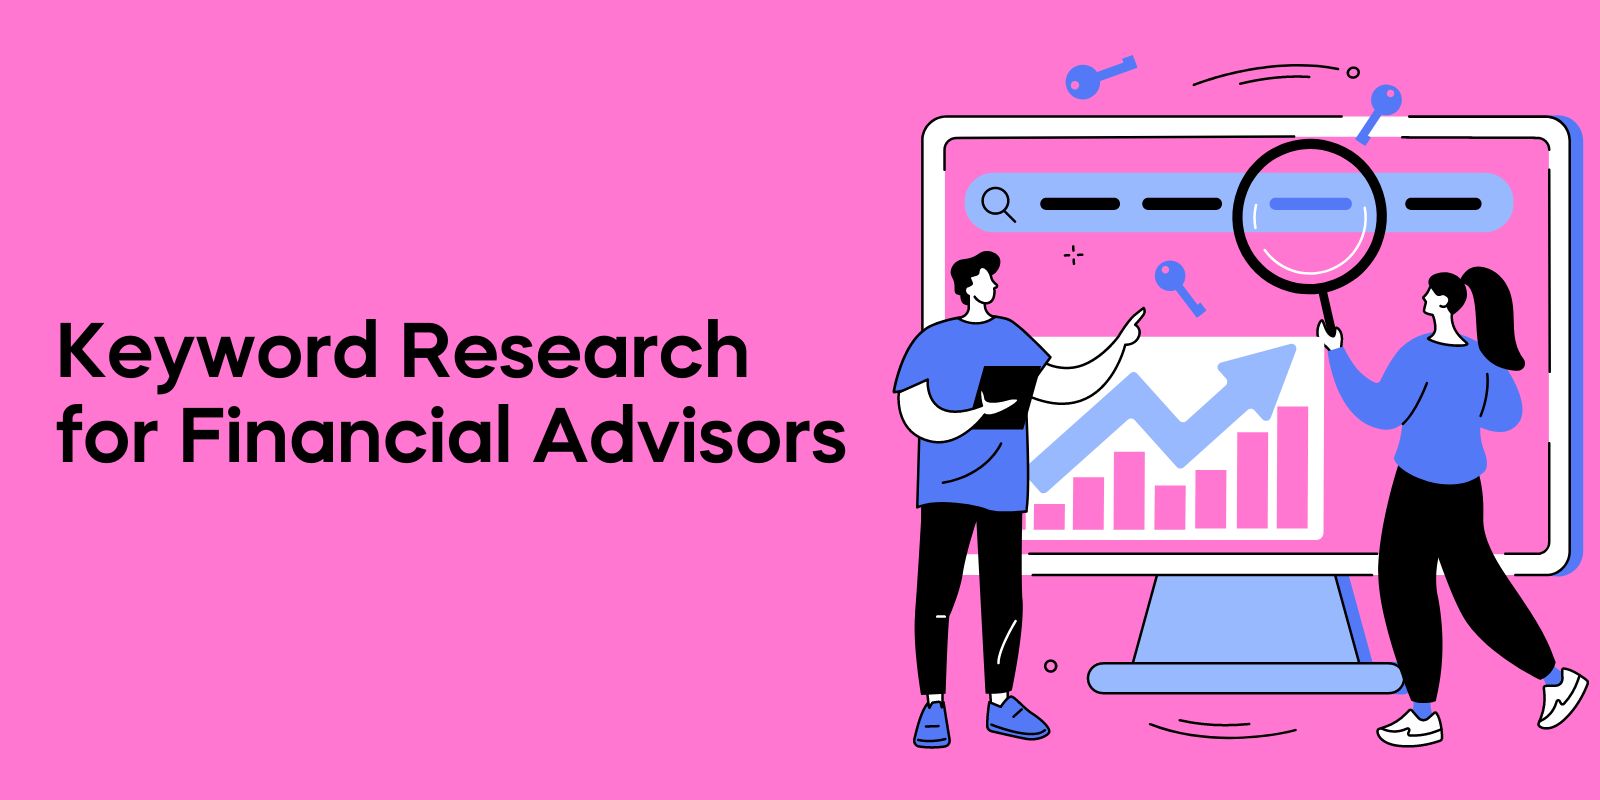 Keyword Research for Financial Advisors